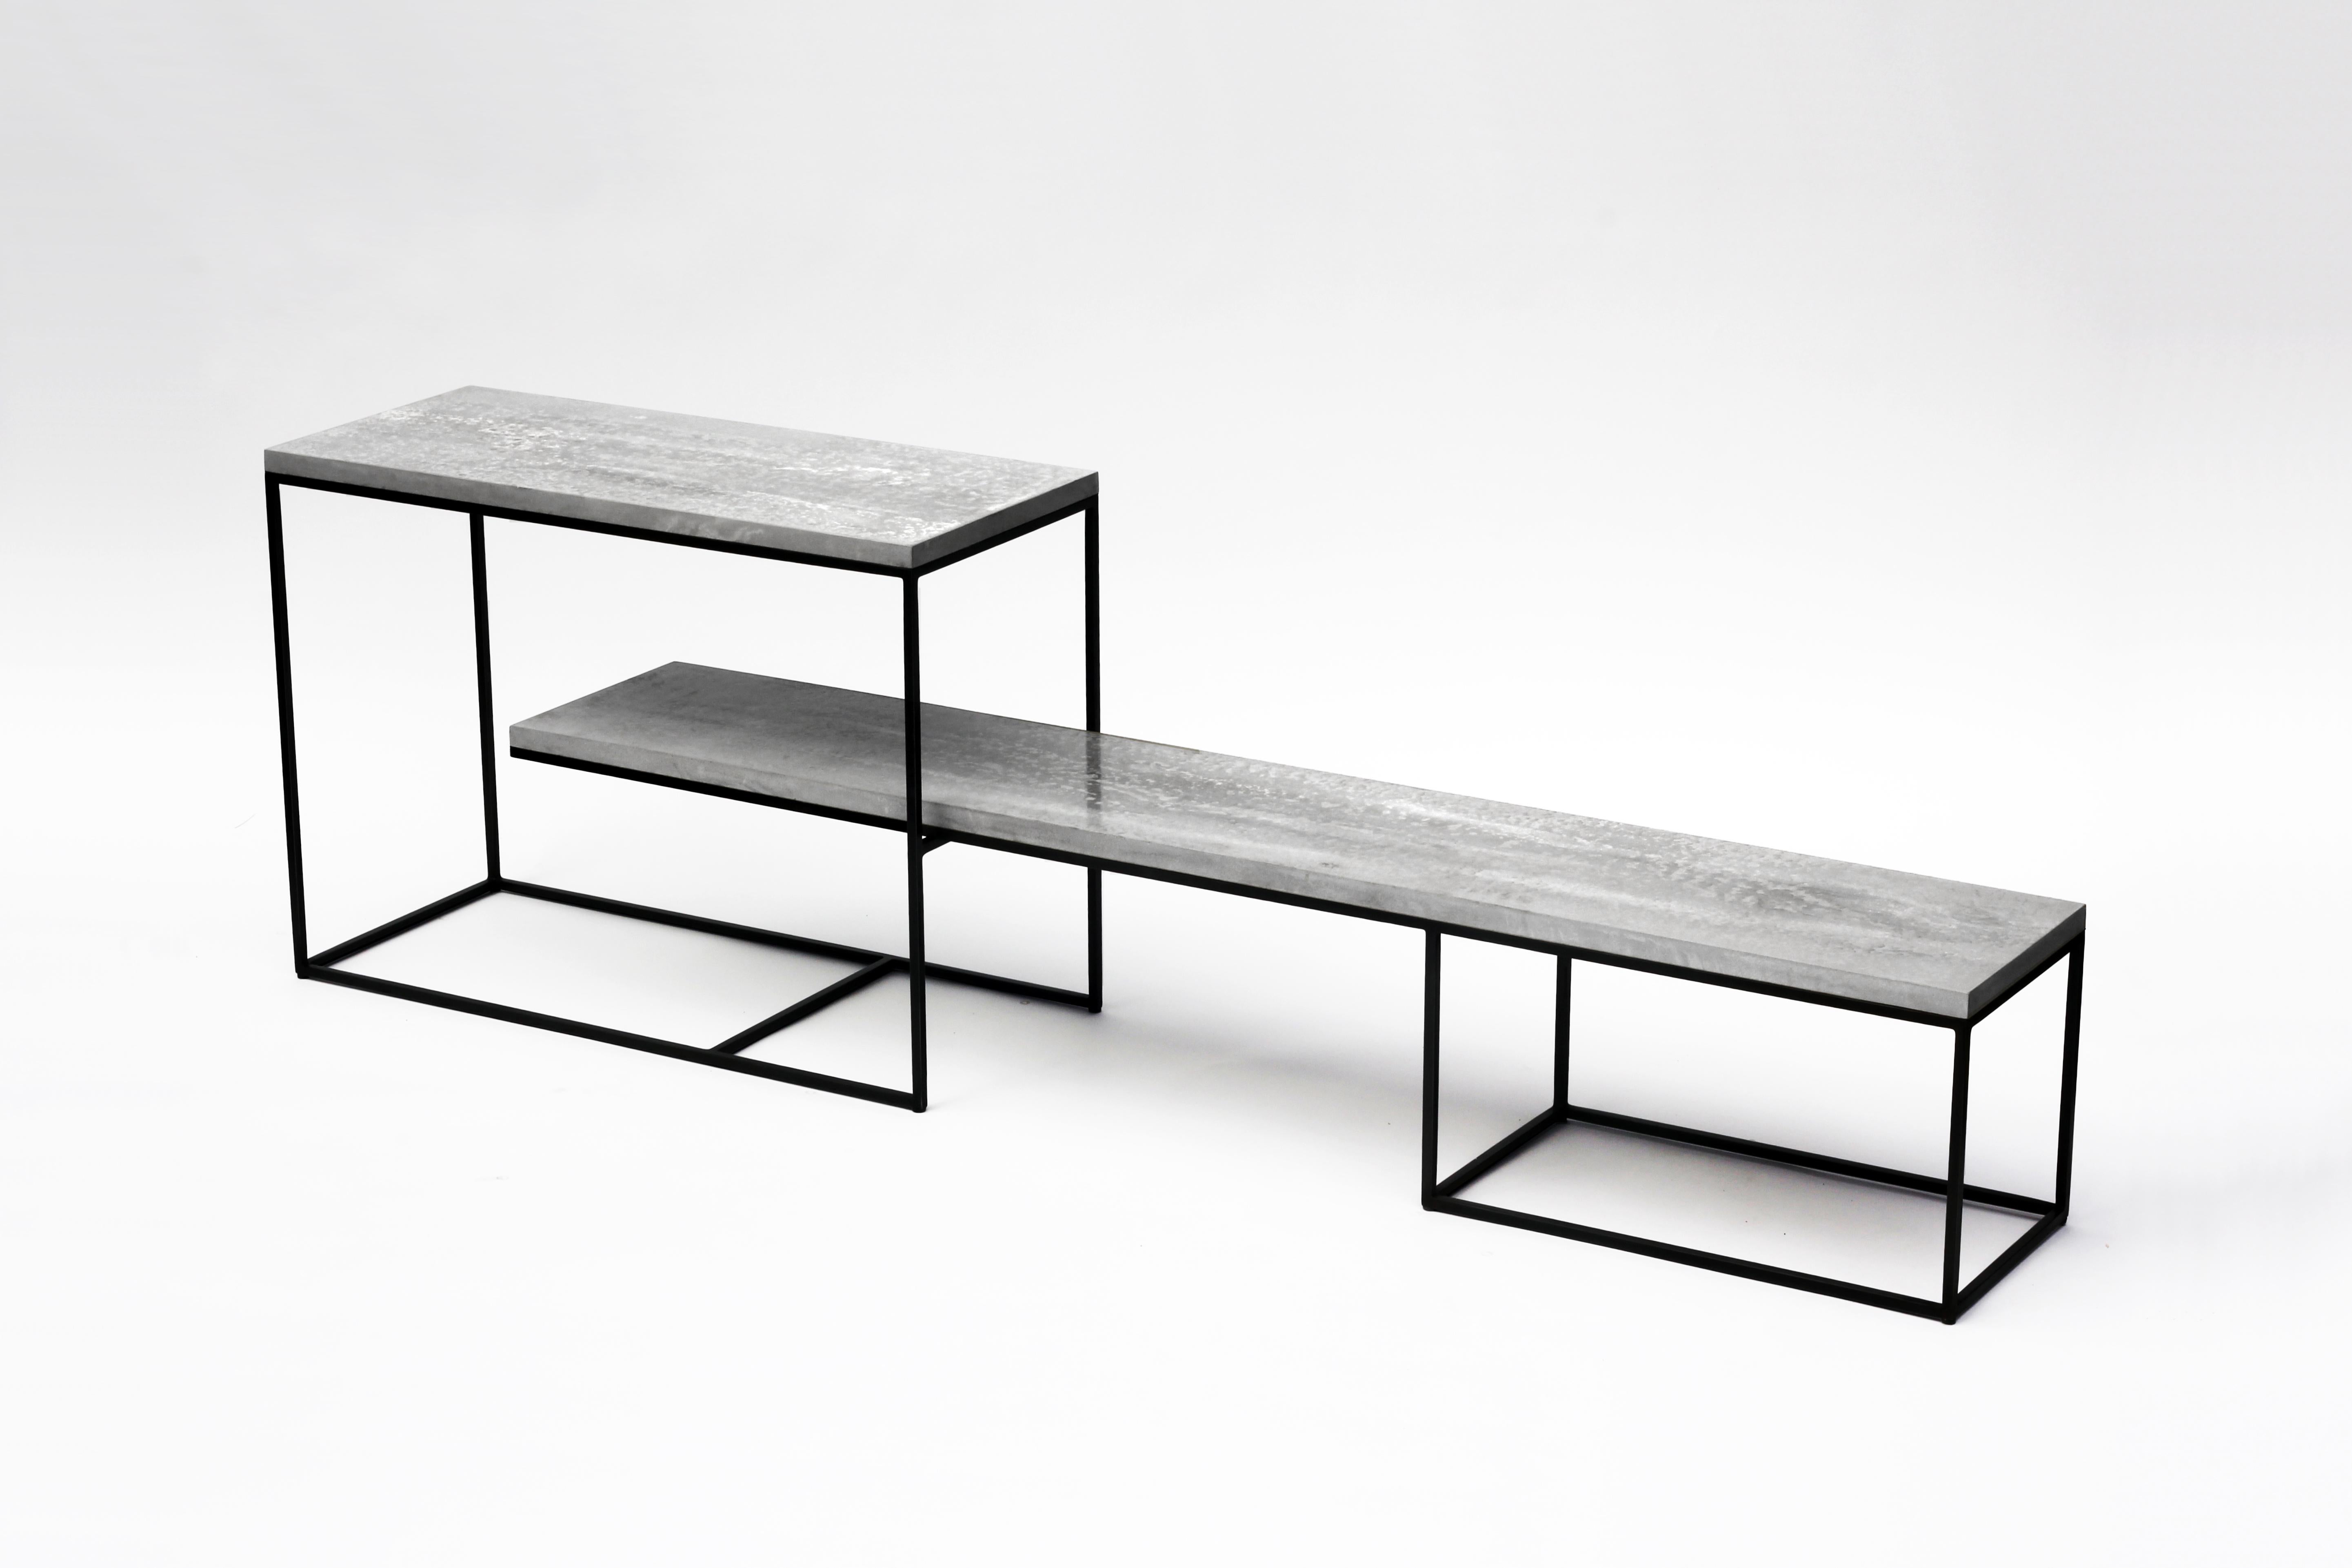 The EE bench-console with exposed concrete edges from Joshua Howe Design is a study in grace and geometry. Sliding together seamlessly, the two blackened steel bases form an adjustable length multi-tier support structure for each of two hand poured